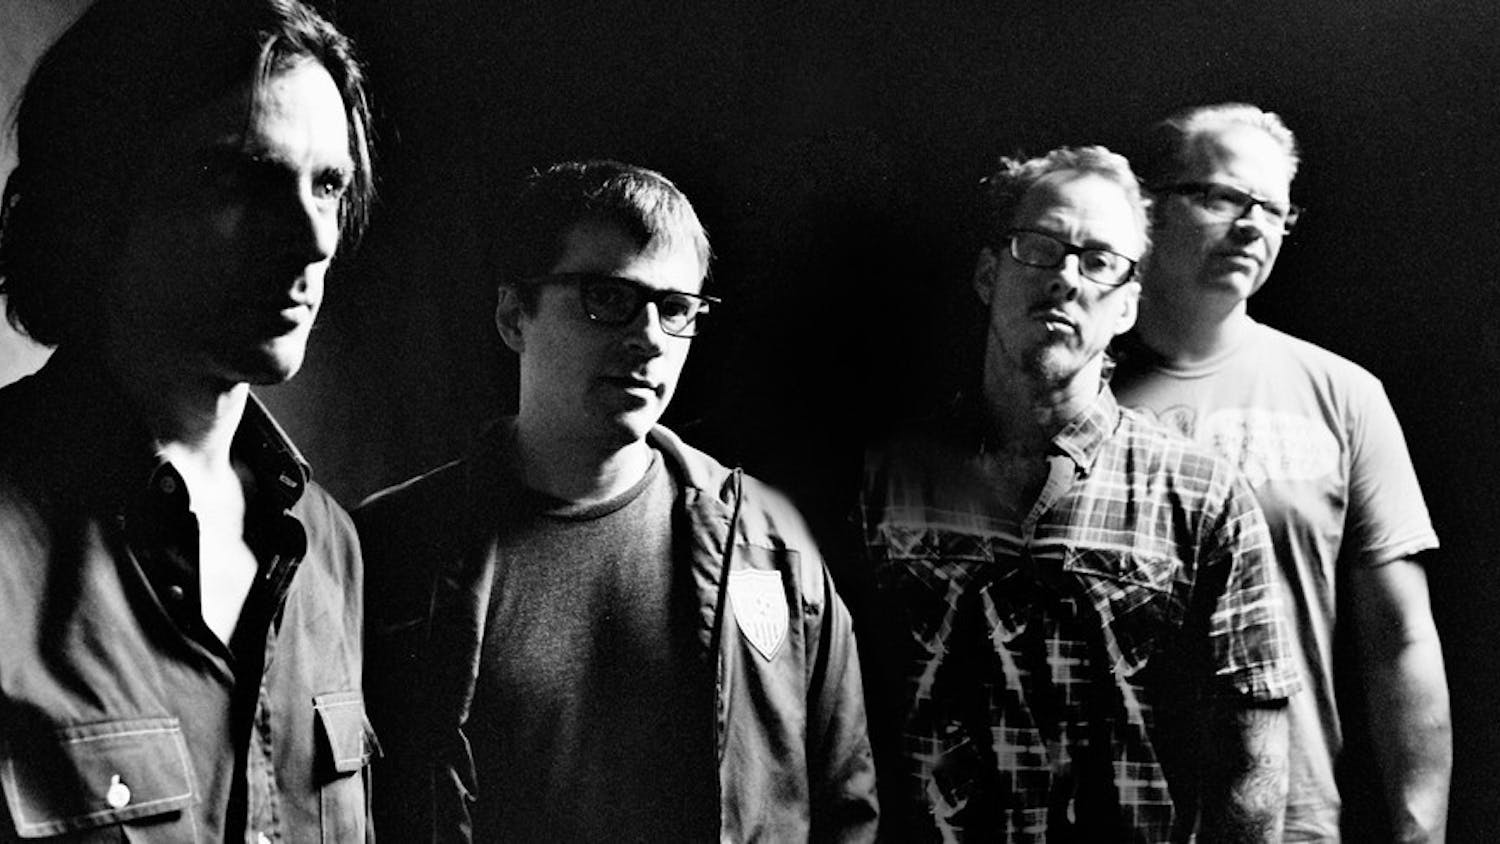 Weezer's new album, "Weezer (White Album)," stays true to their original grunge-rock sound and does not attempt to adapt or reinvent the band.